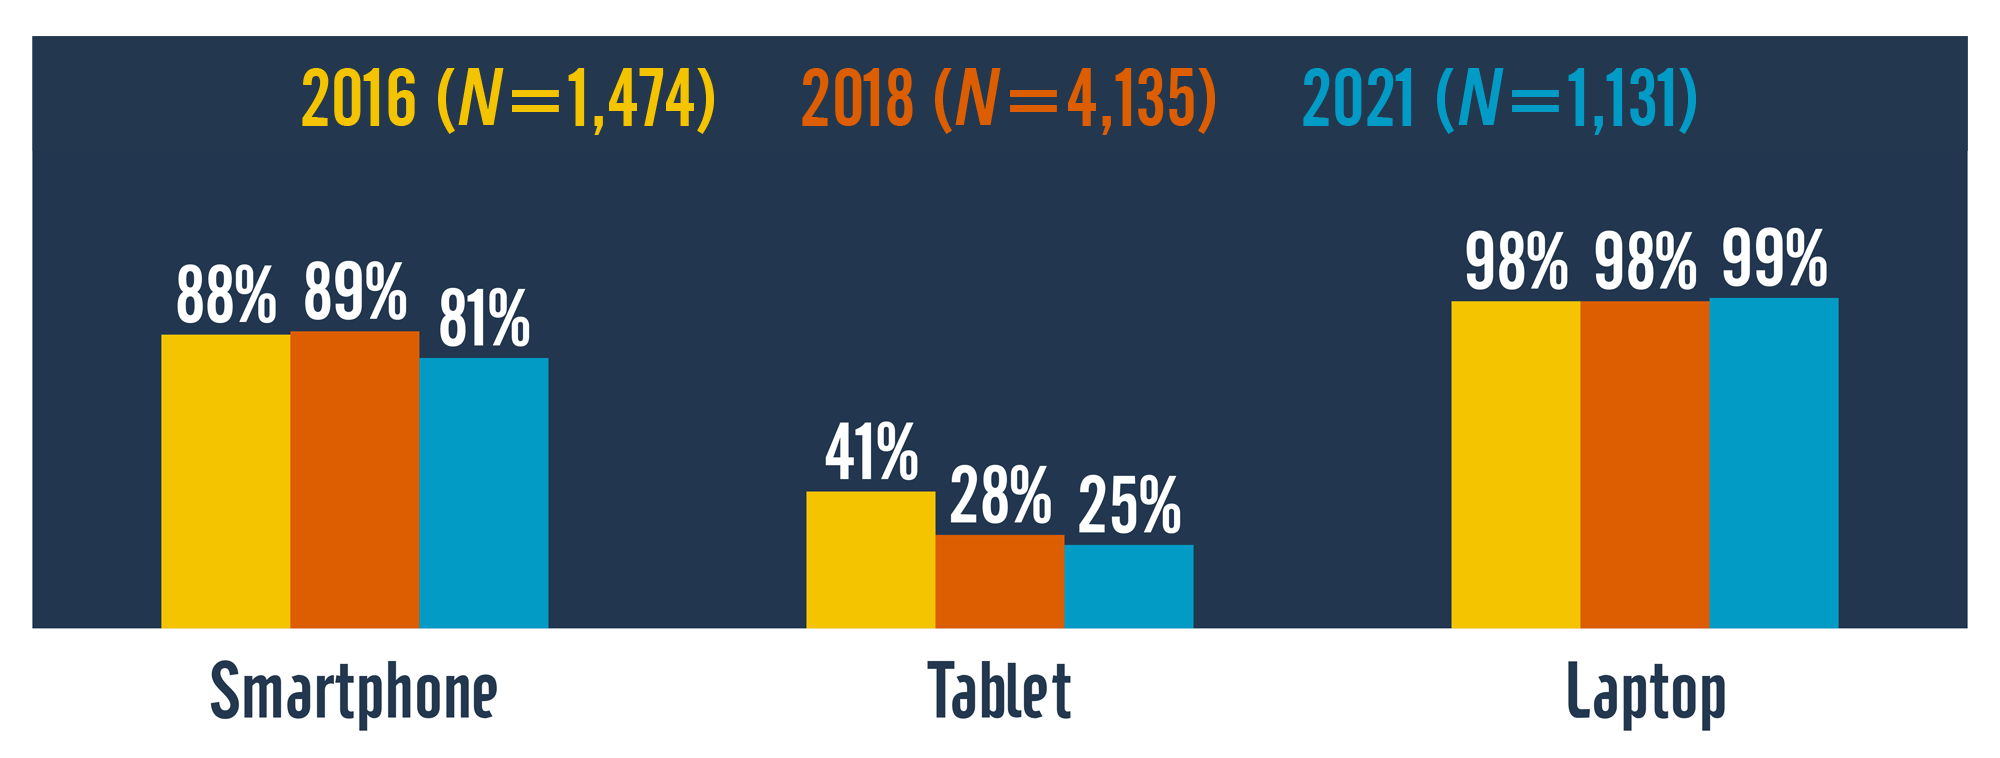 Column chart comparing student use for learning of smartphones, tablets, and laptops across three survey years (2016, 2018, and 2021). Smartphone usage in those three years was 88%, 89%, and 81%. Tablet usage was 41%, 28%, and 25%. Laptop usage was 98%, 98%, and 99%.